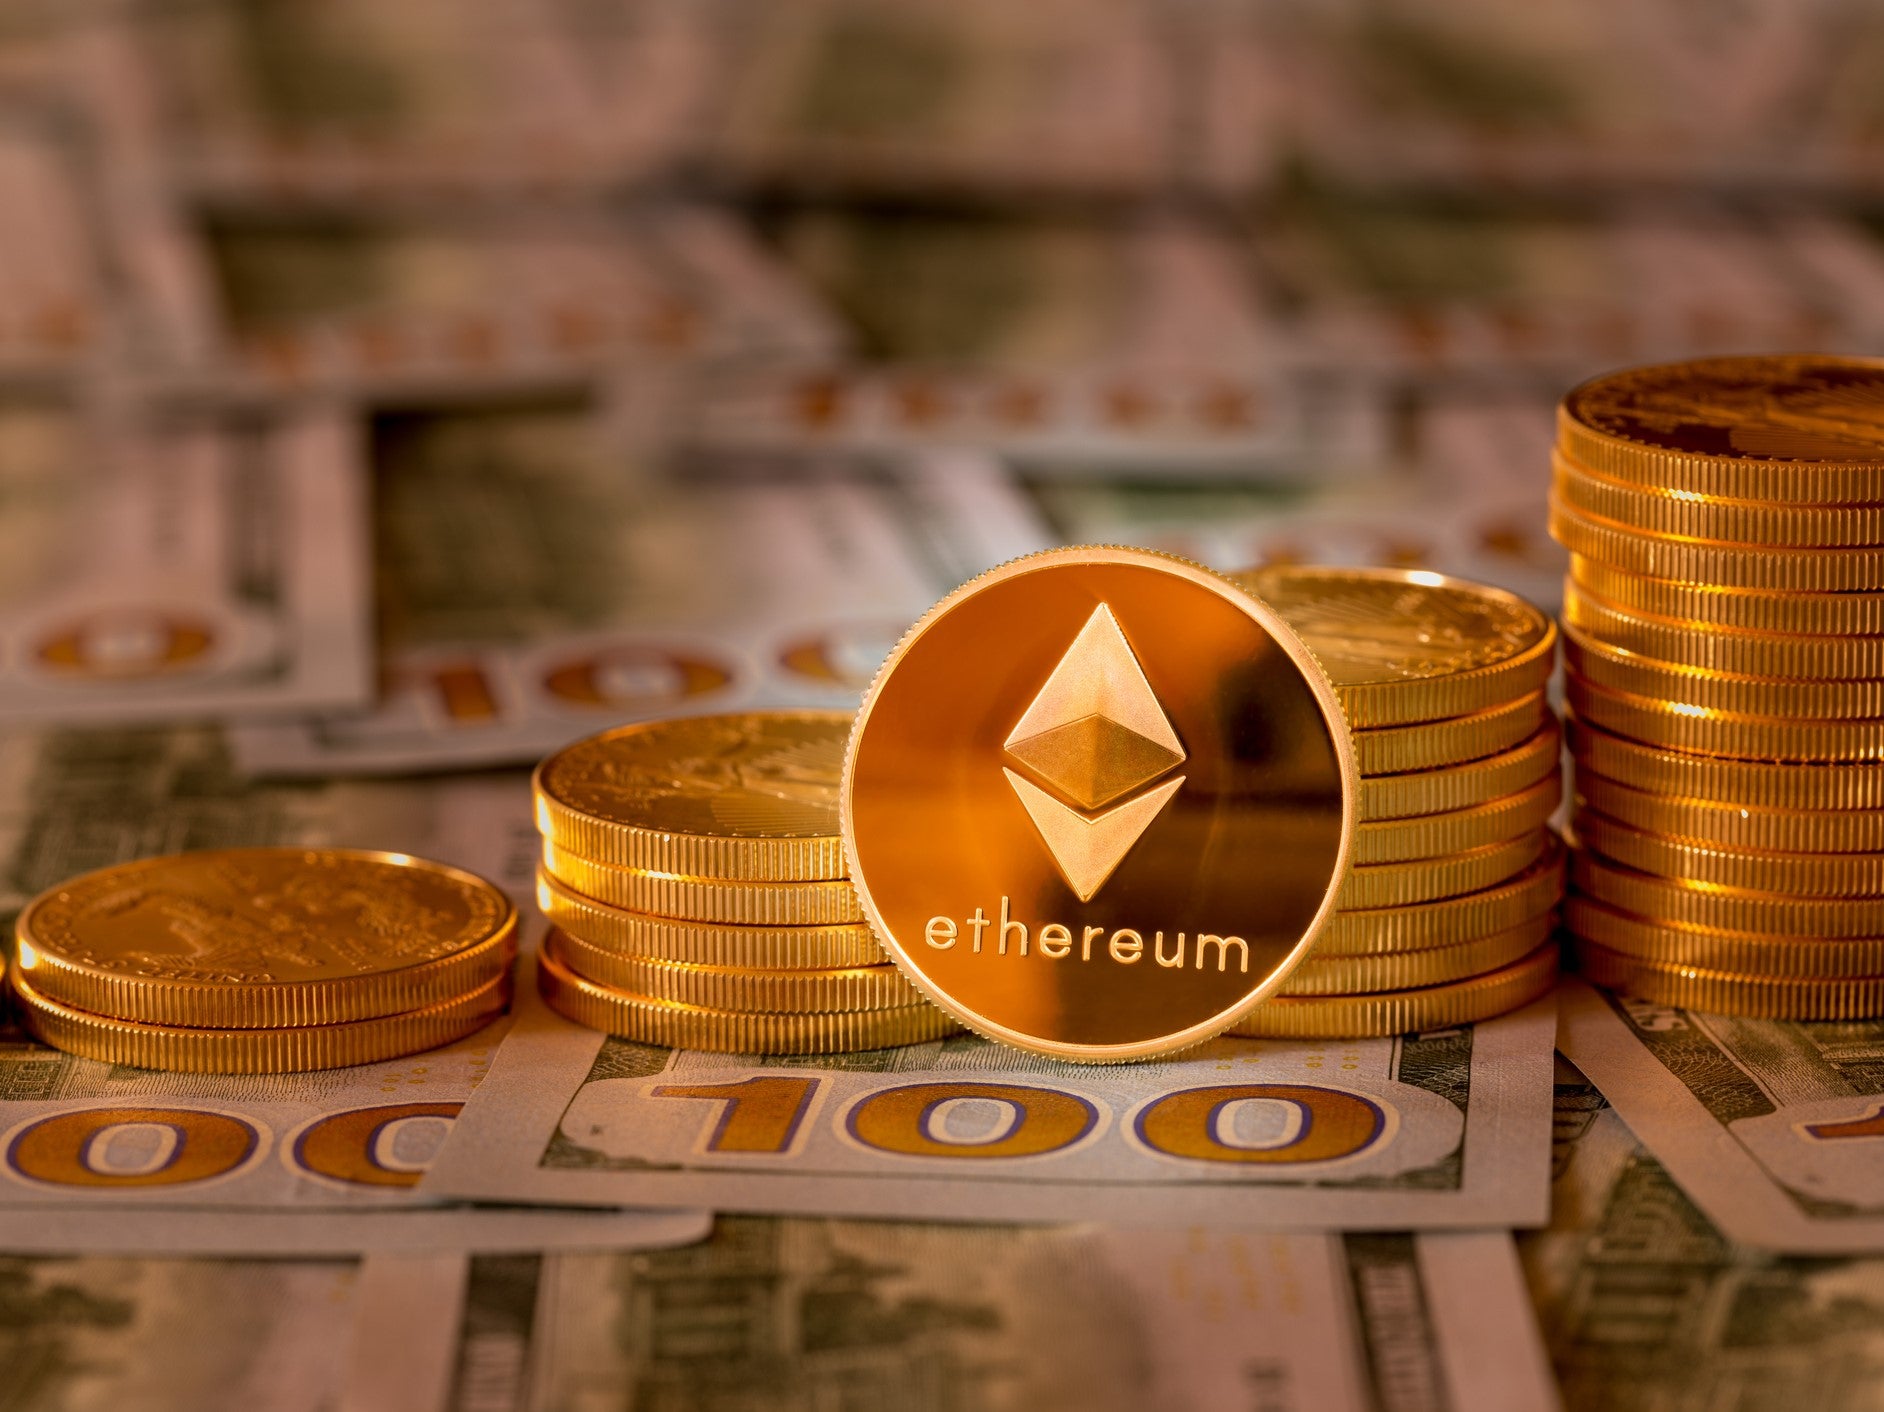 The price of Ethereum (ether) has risen more than 500 per cent in 2021